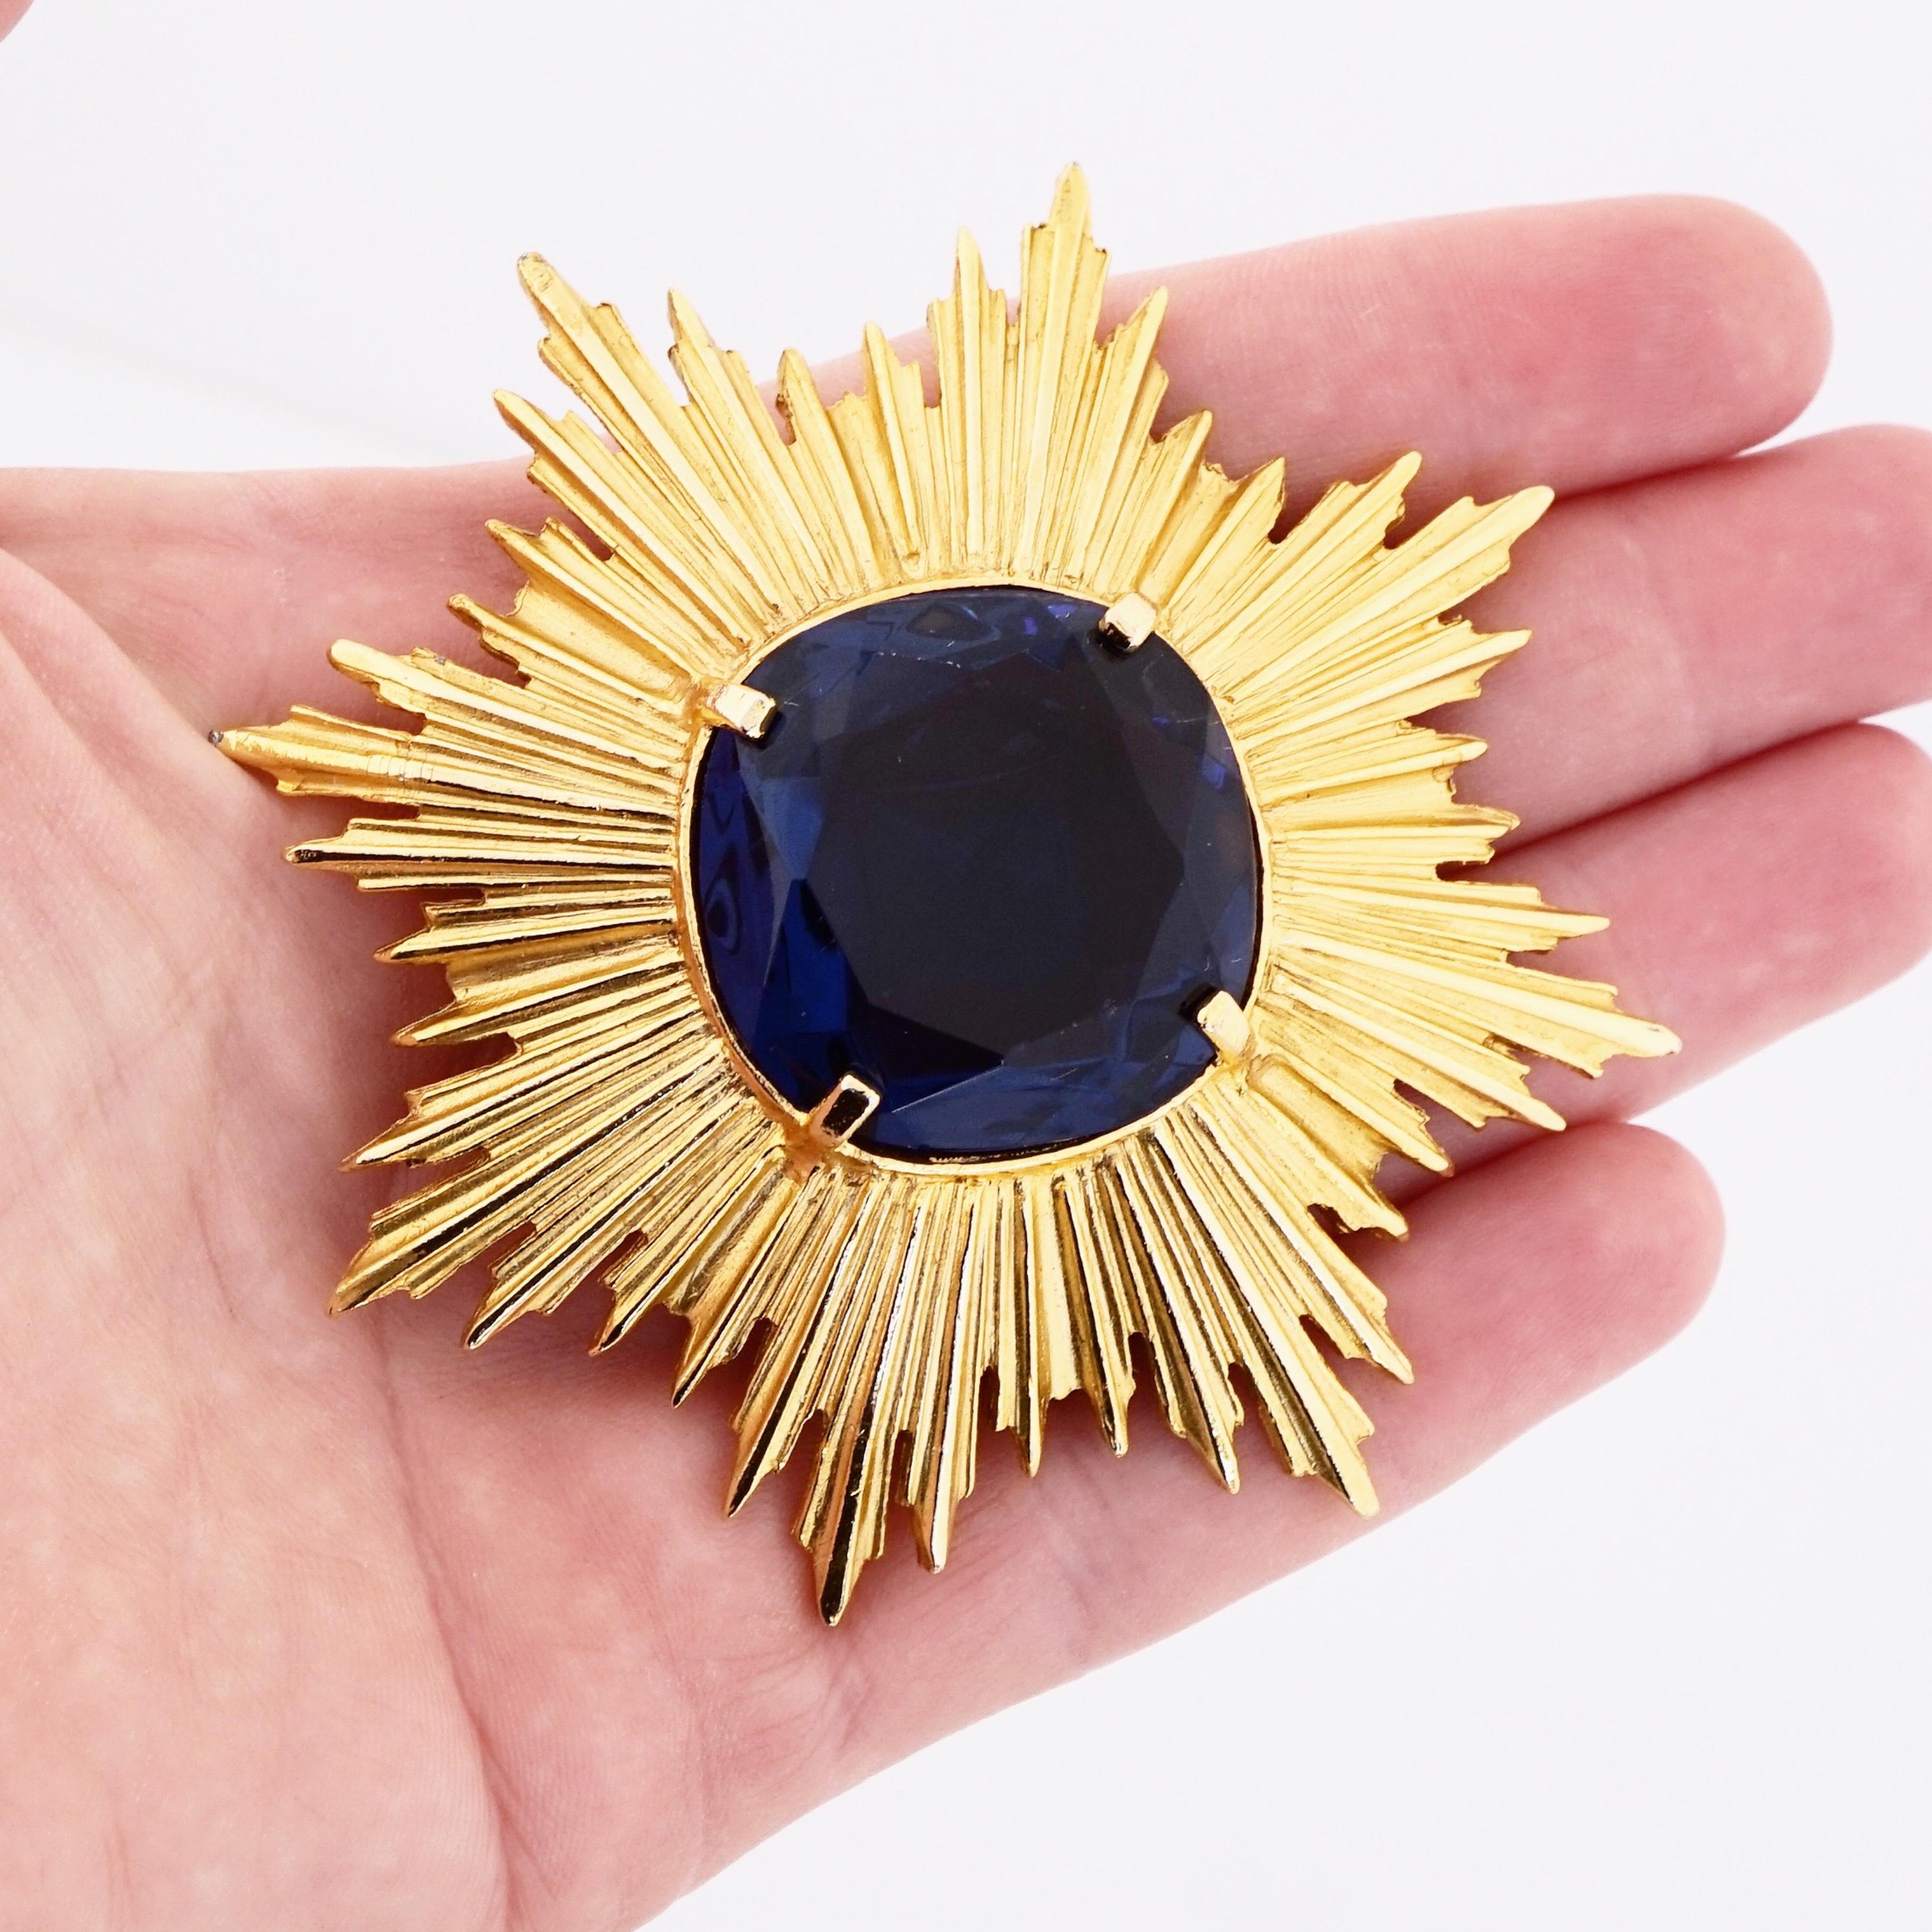 Women's Oversized Gold Sunburst Brooch With Blue Sapphire Crystal By Accessocraft, 1970s